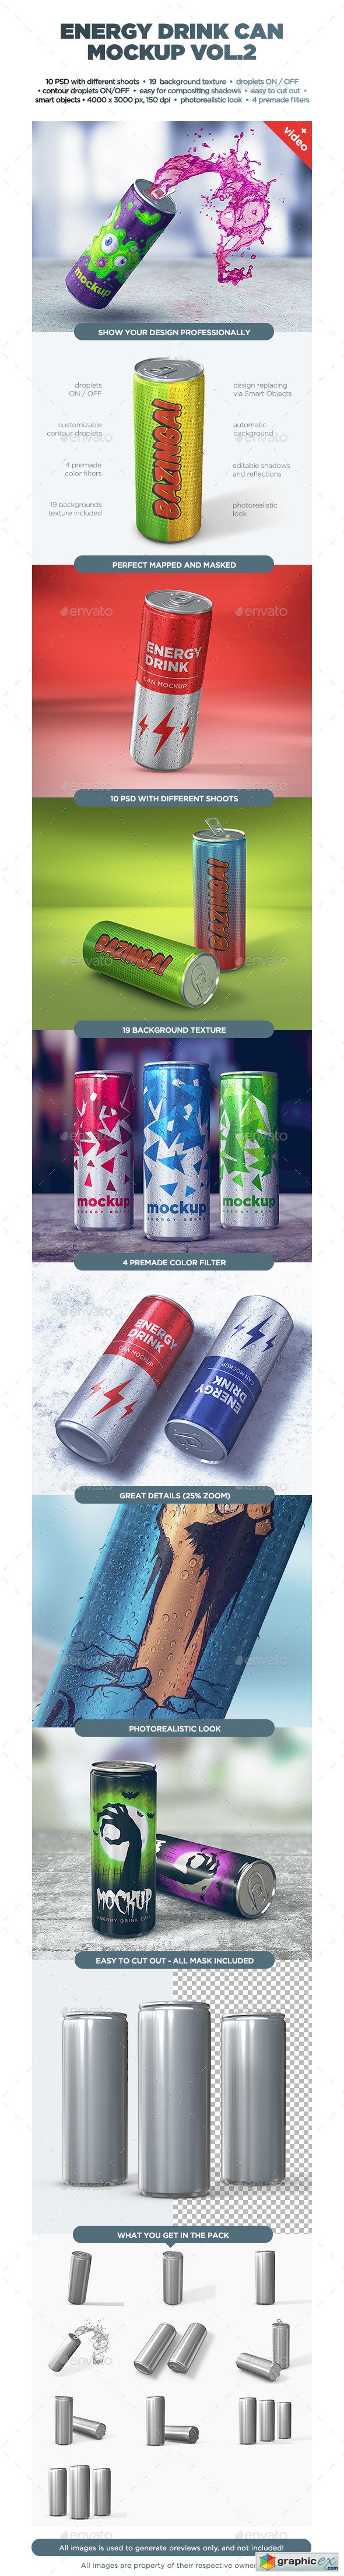 Energy Drink Can Mockup vol2